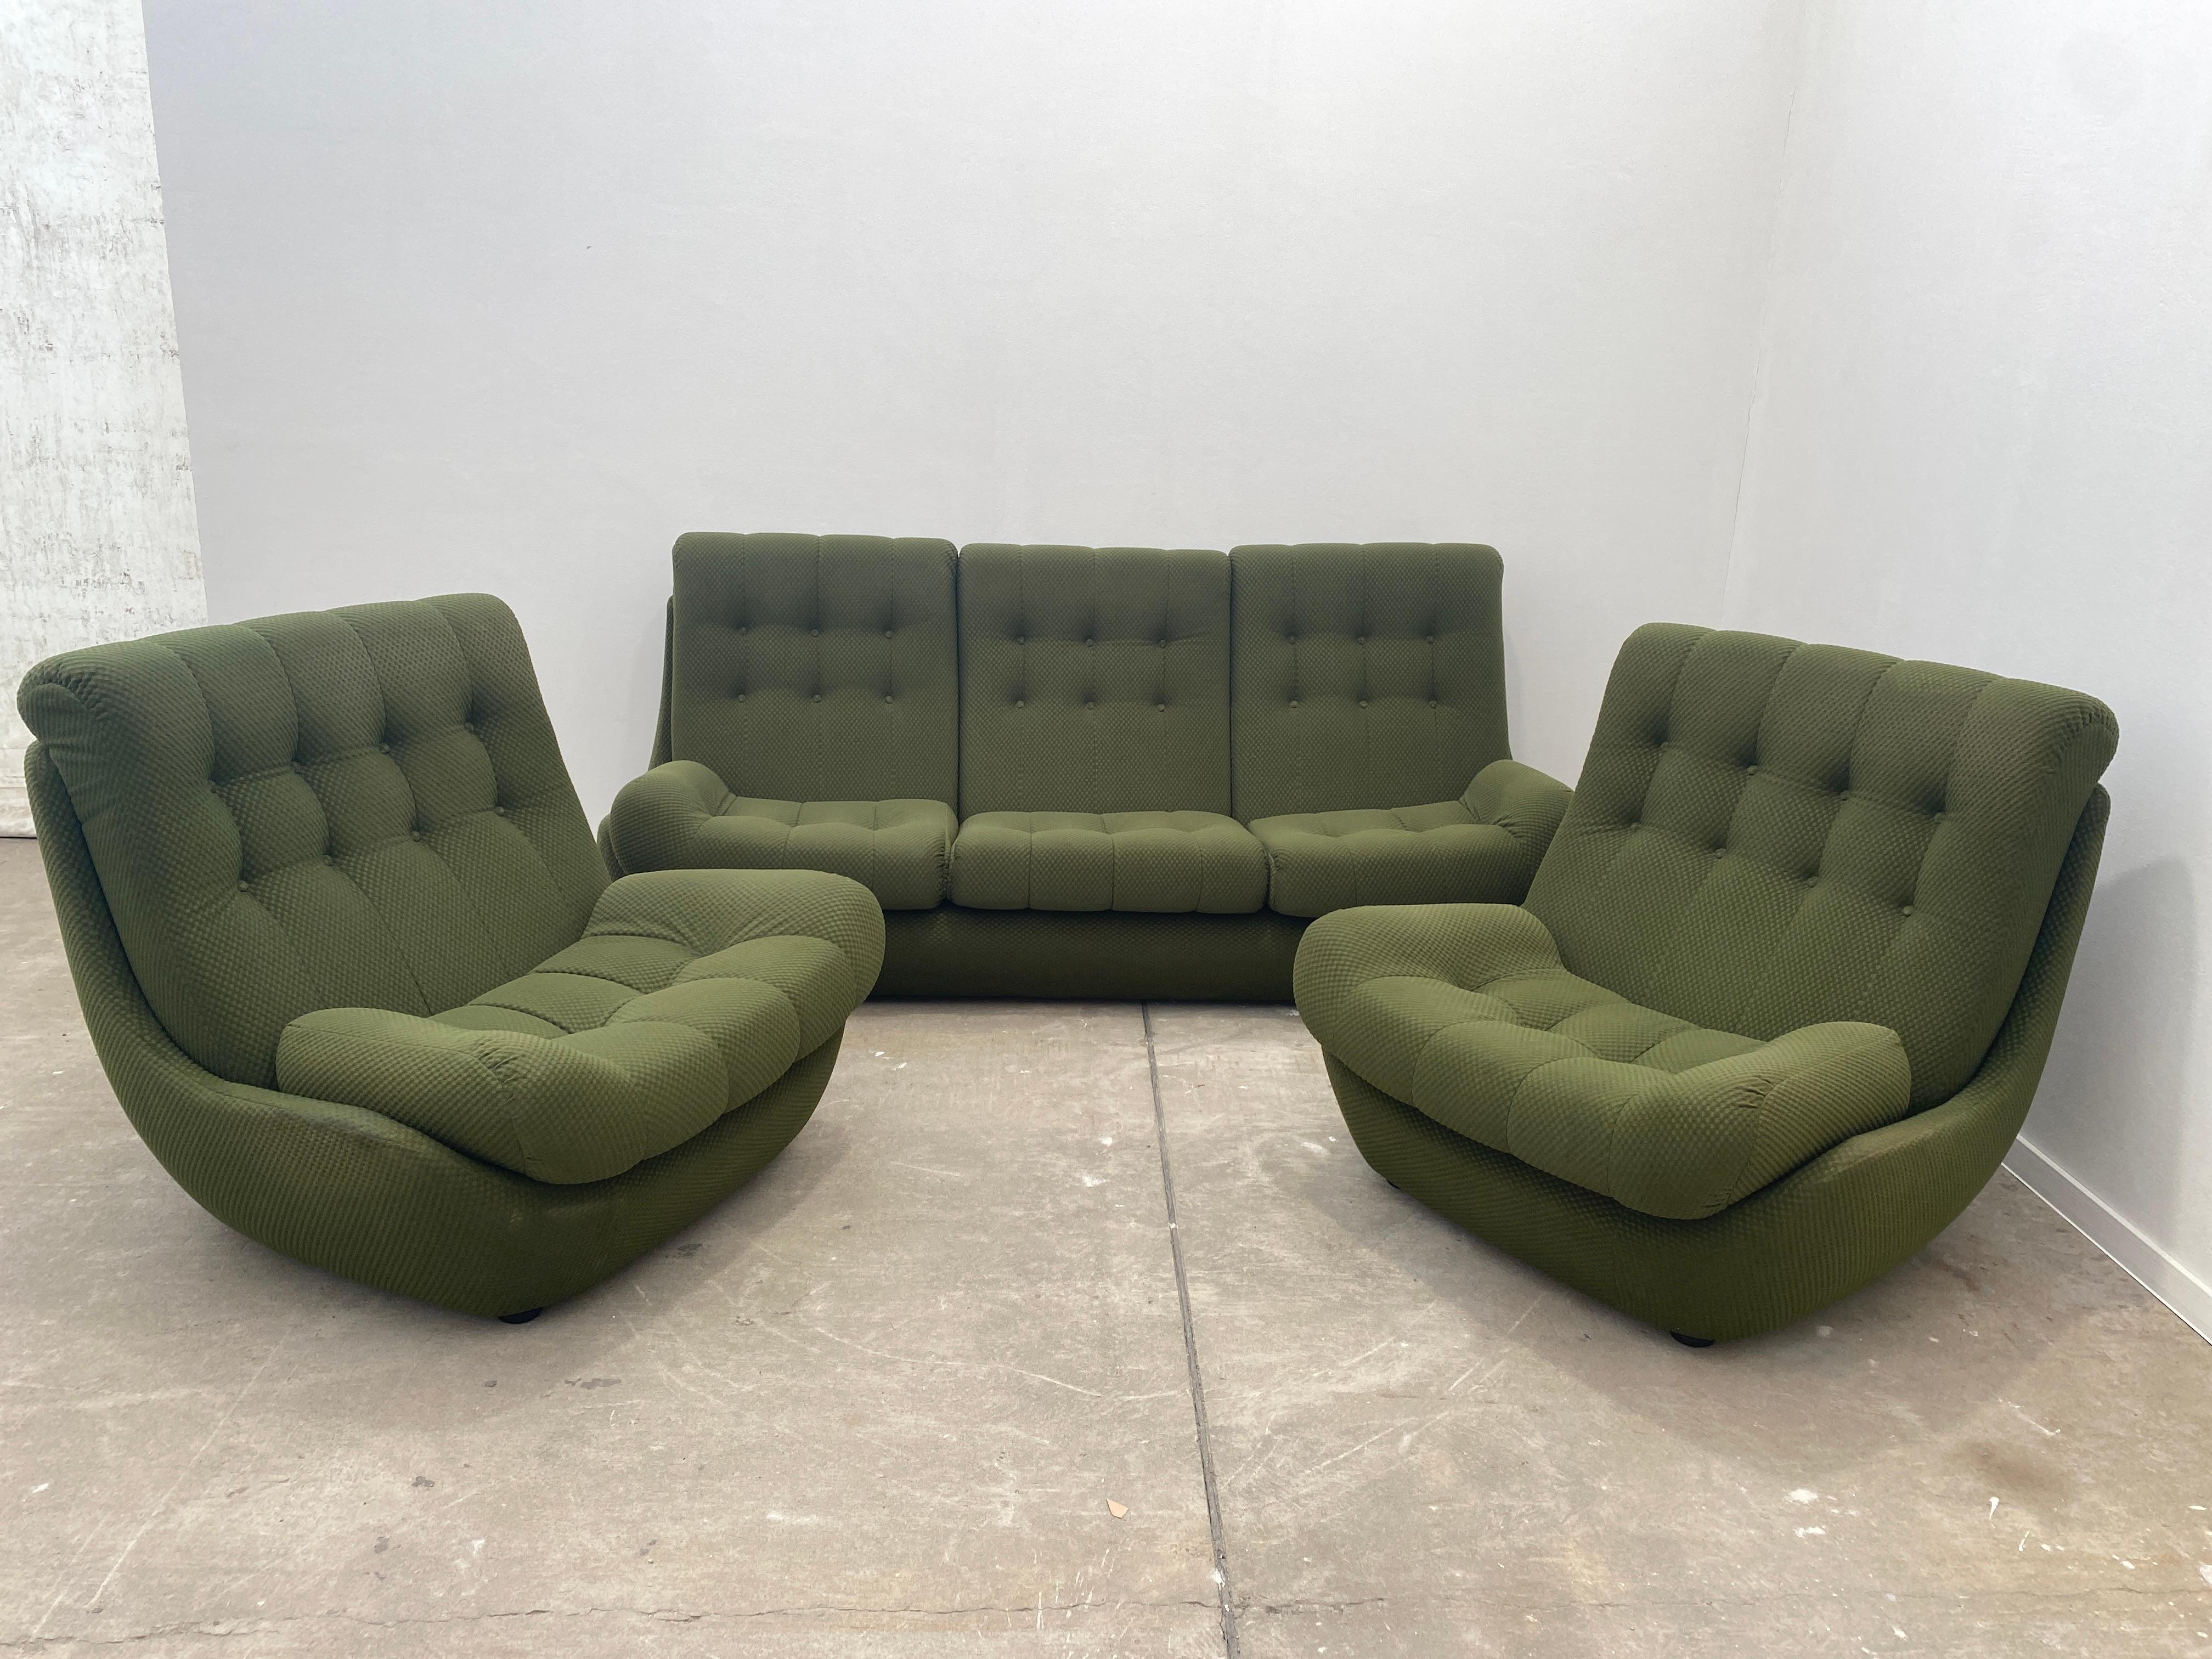 Eastern Bloc Vintage Living Room Set by Jitona, Czechoslovakia, 1970s In Good Condition In Prague 8, CZ